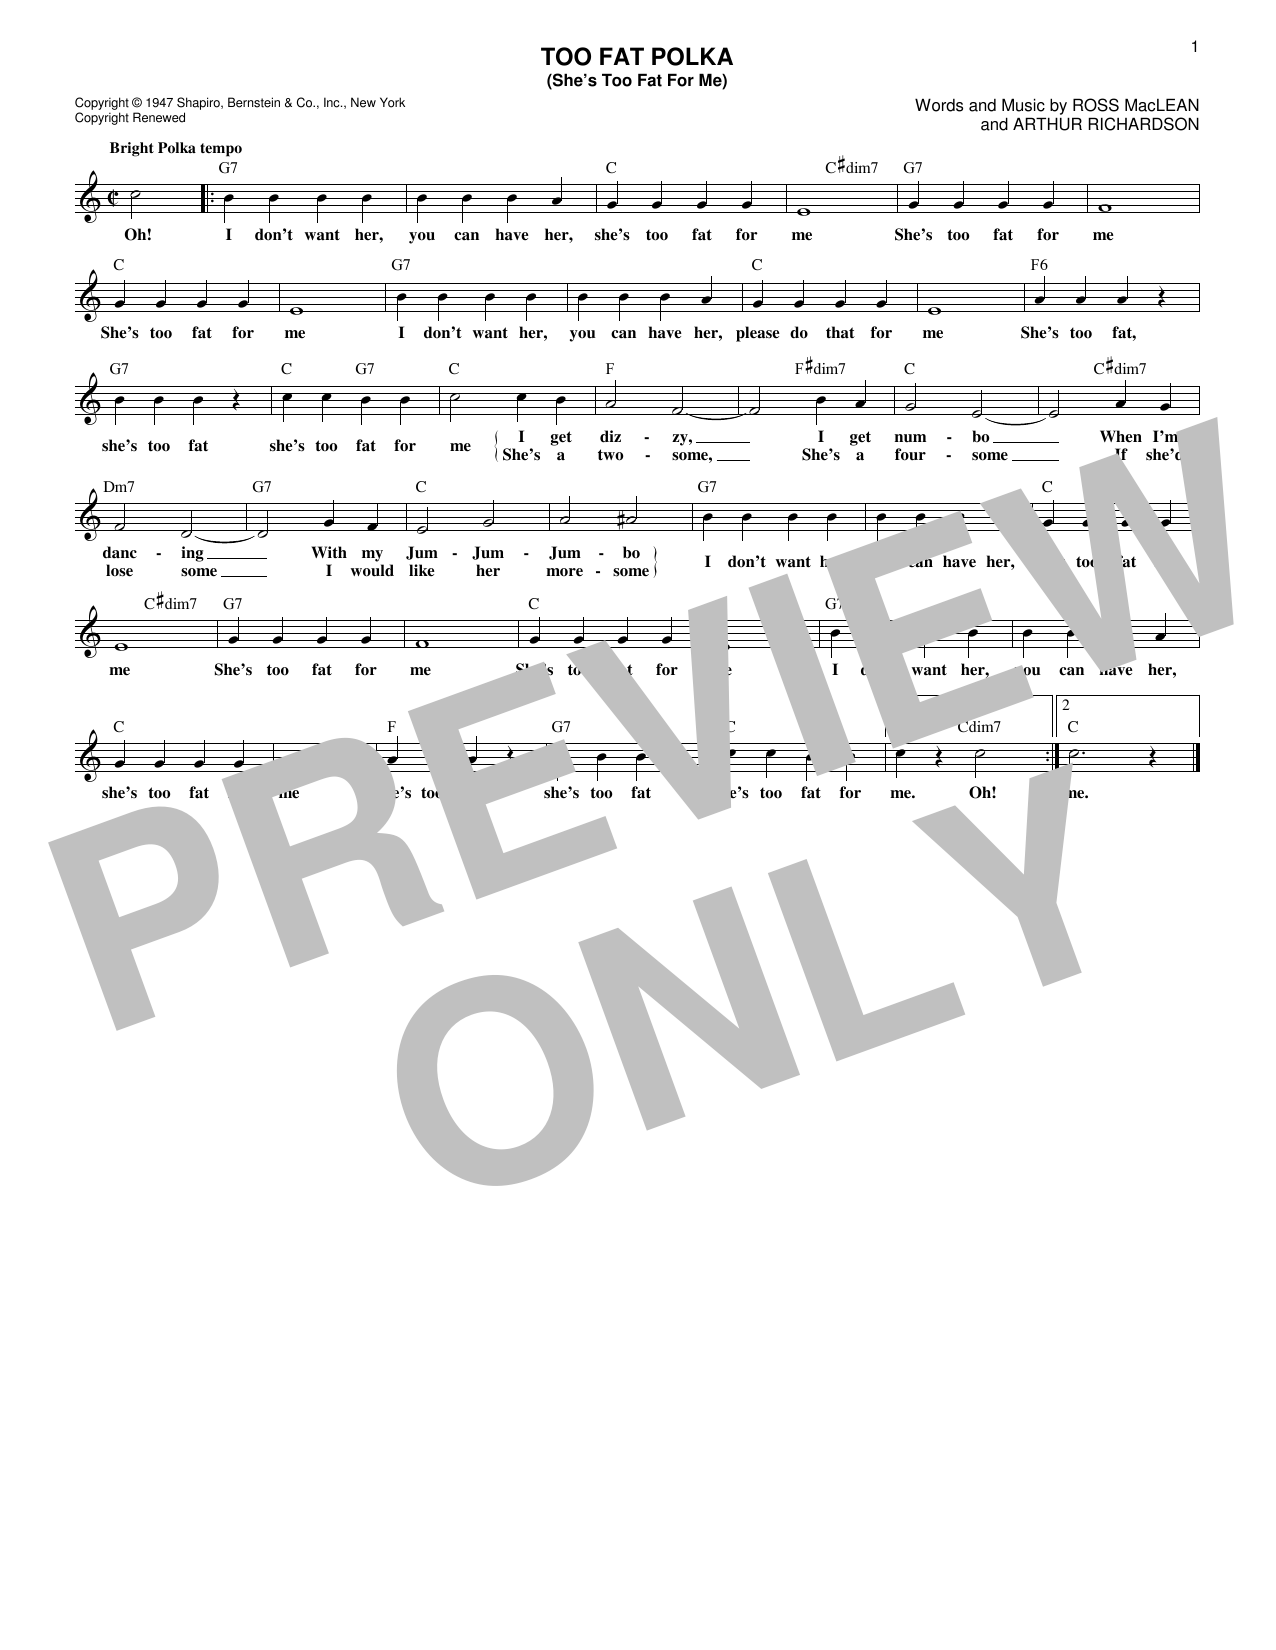 Download Frankie Yankovic Too Fat Polka (She's Too Fat For Me) Sheet Music